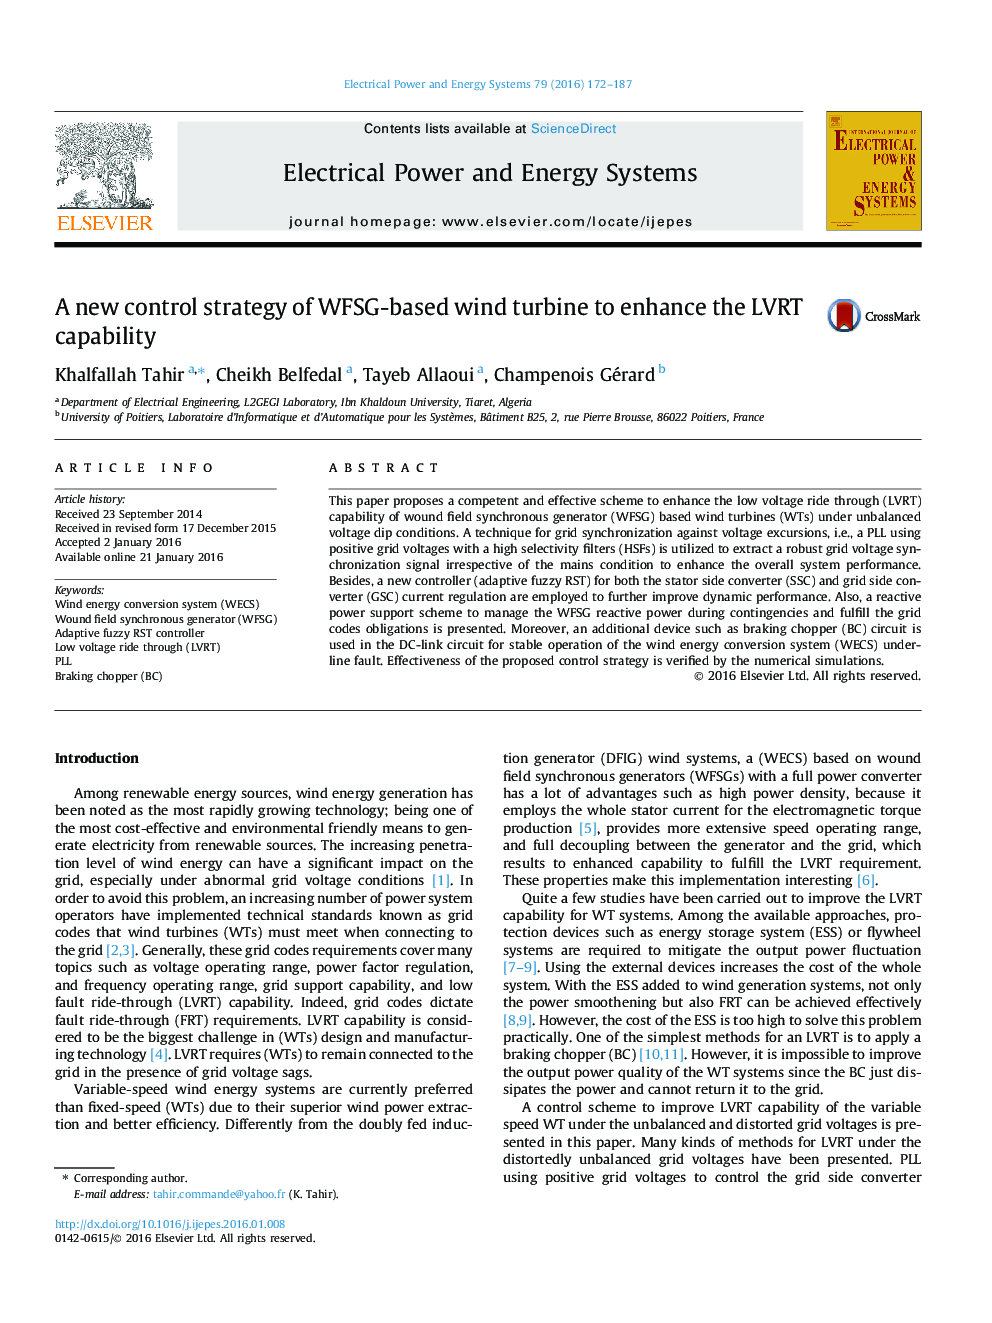 A new control strategy of WFSG-based wind turbine to enhance the LVRT capability